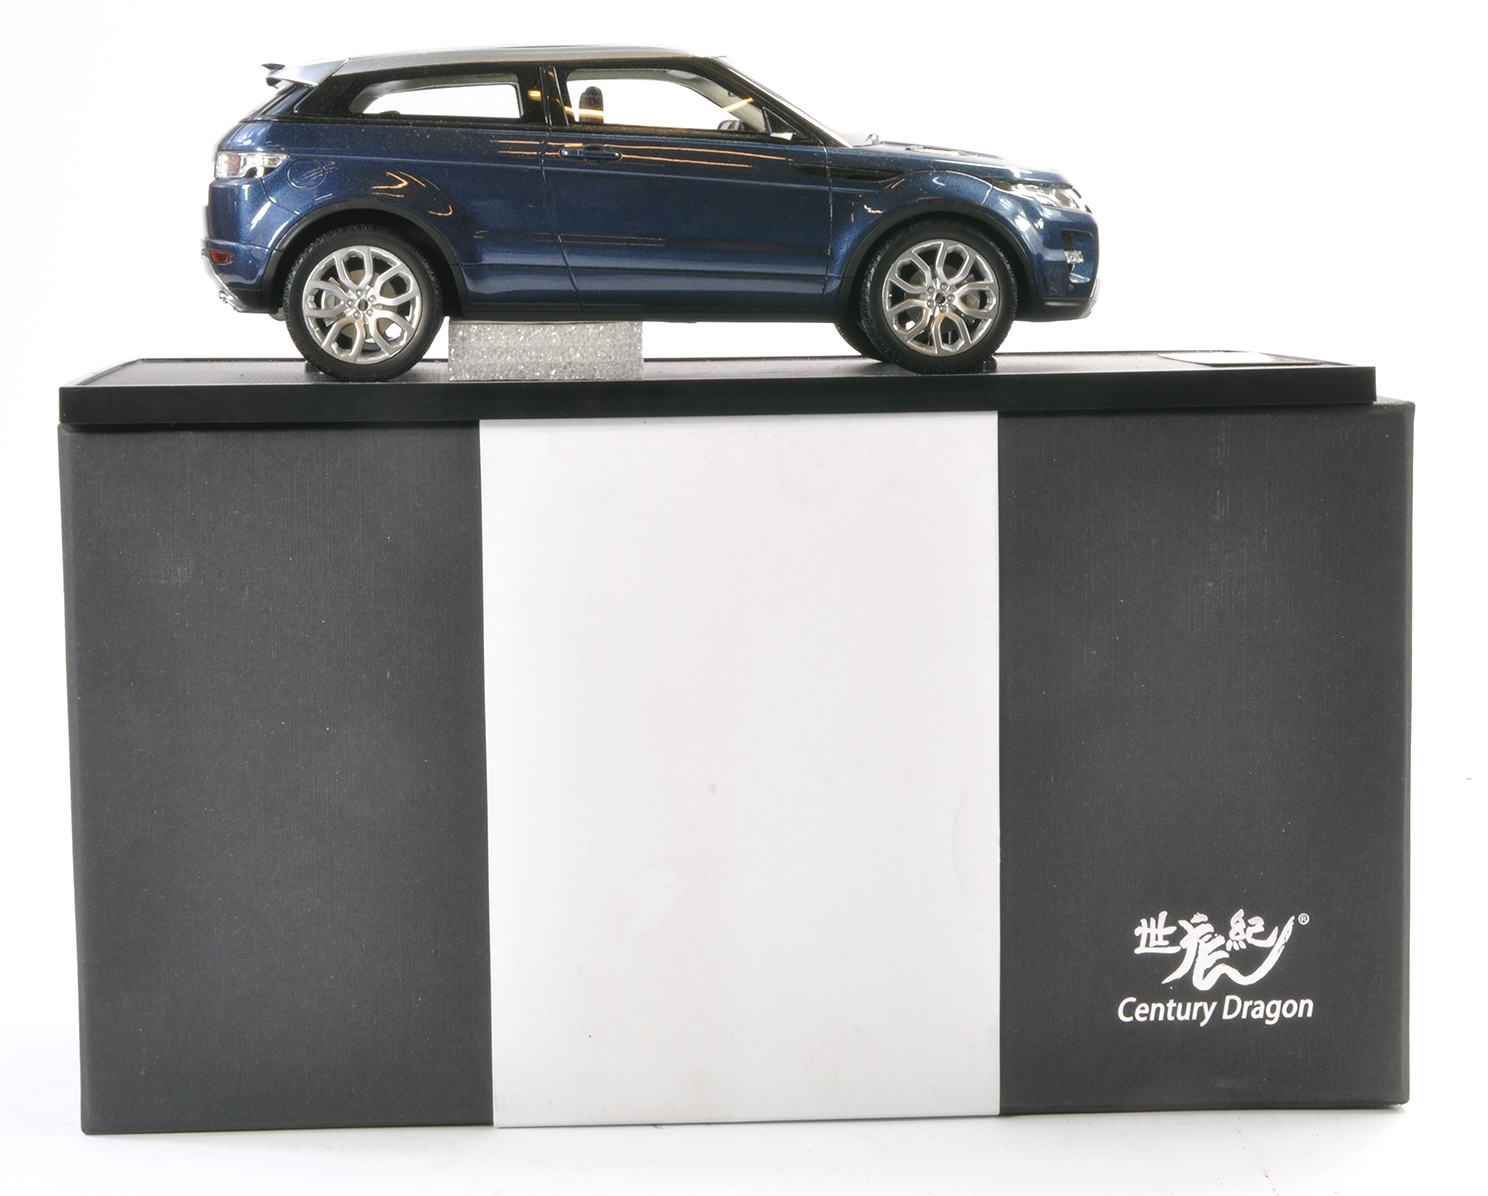 A duo of 1/18 Resin Land Rover Evoque Models from Century Dragon. One opened (with mirror